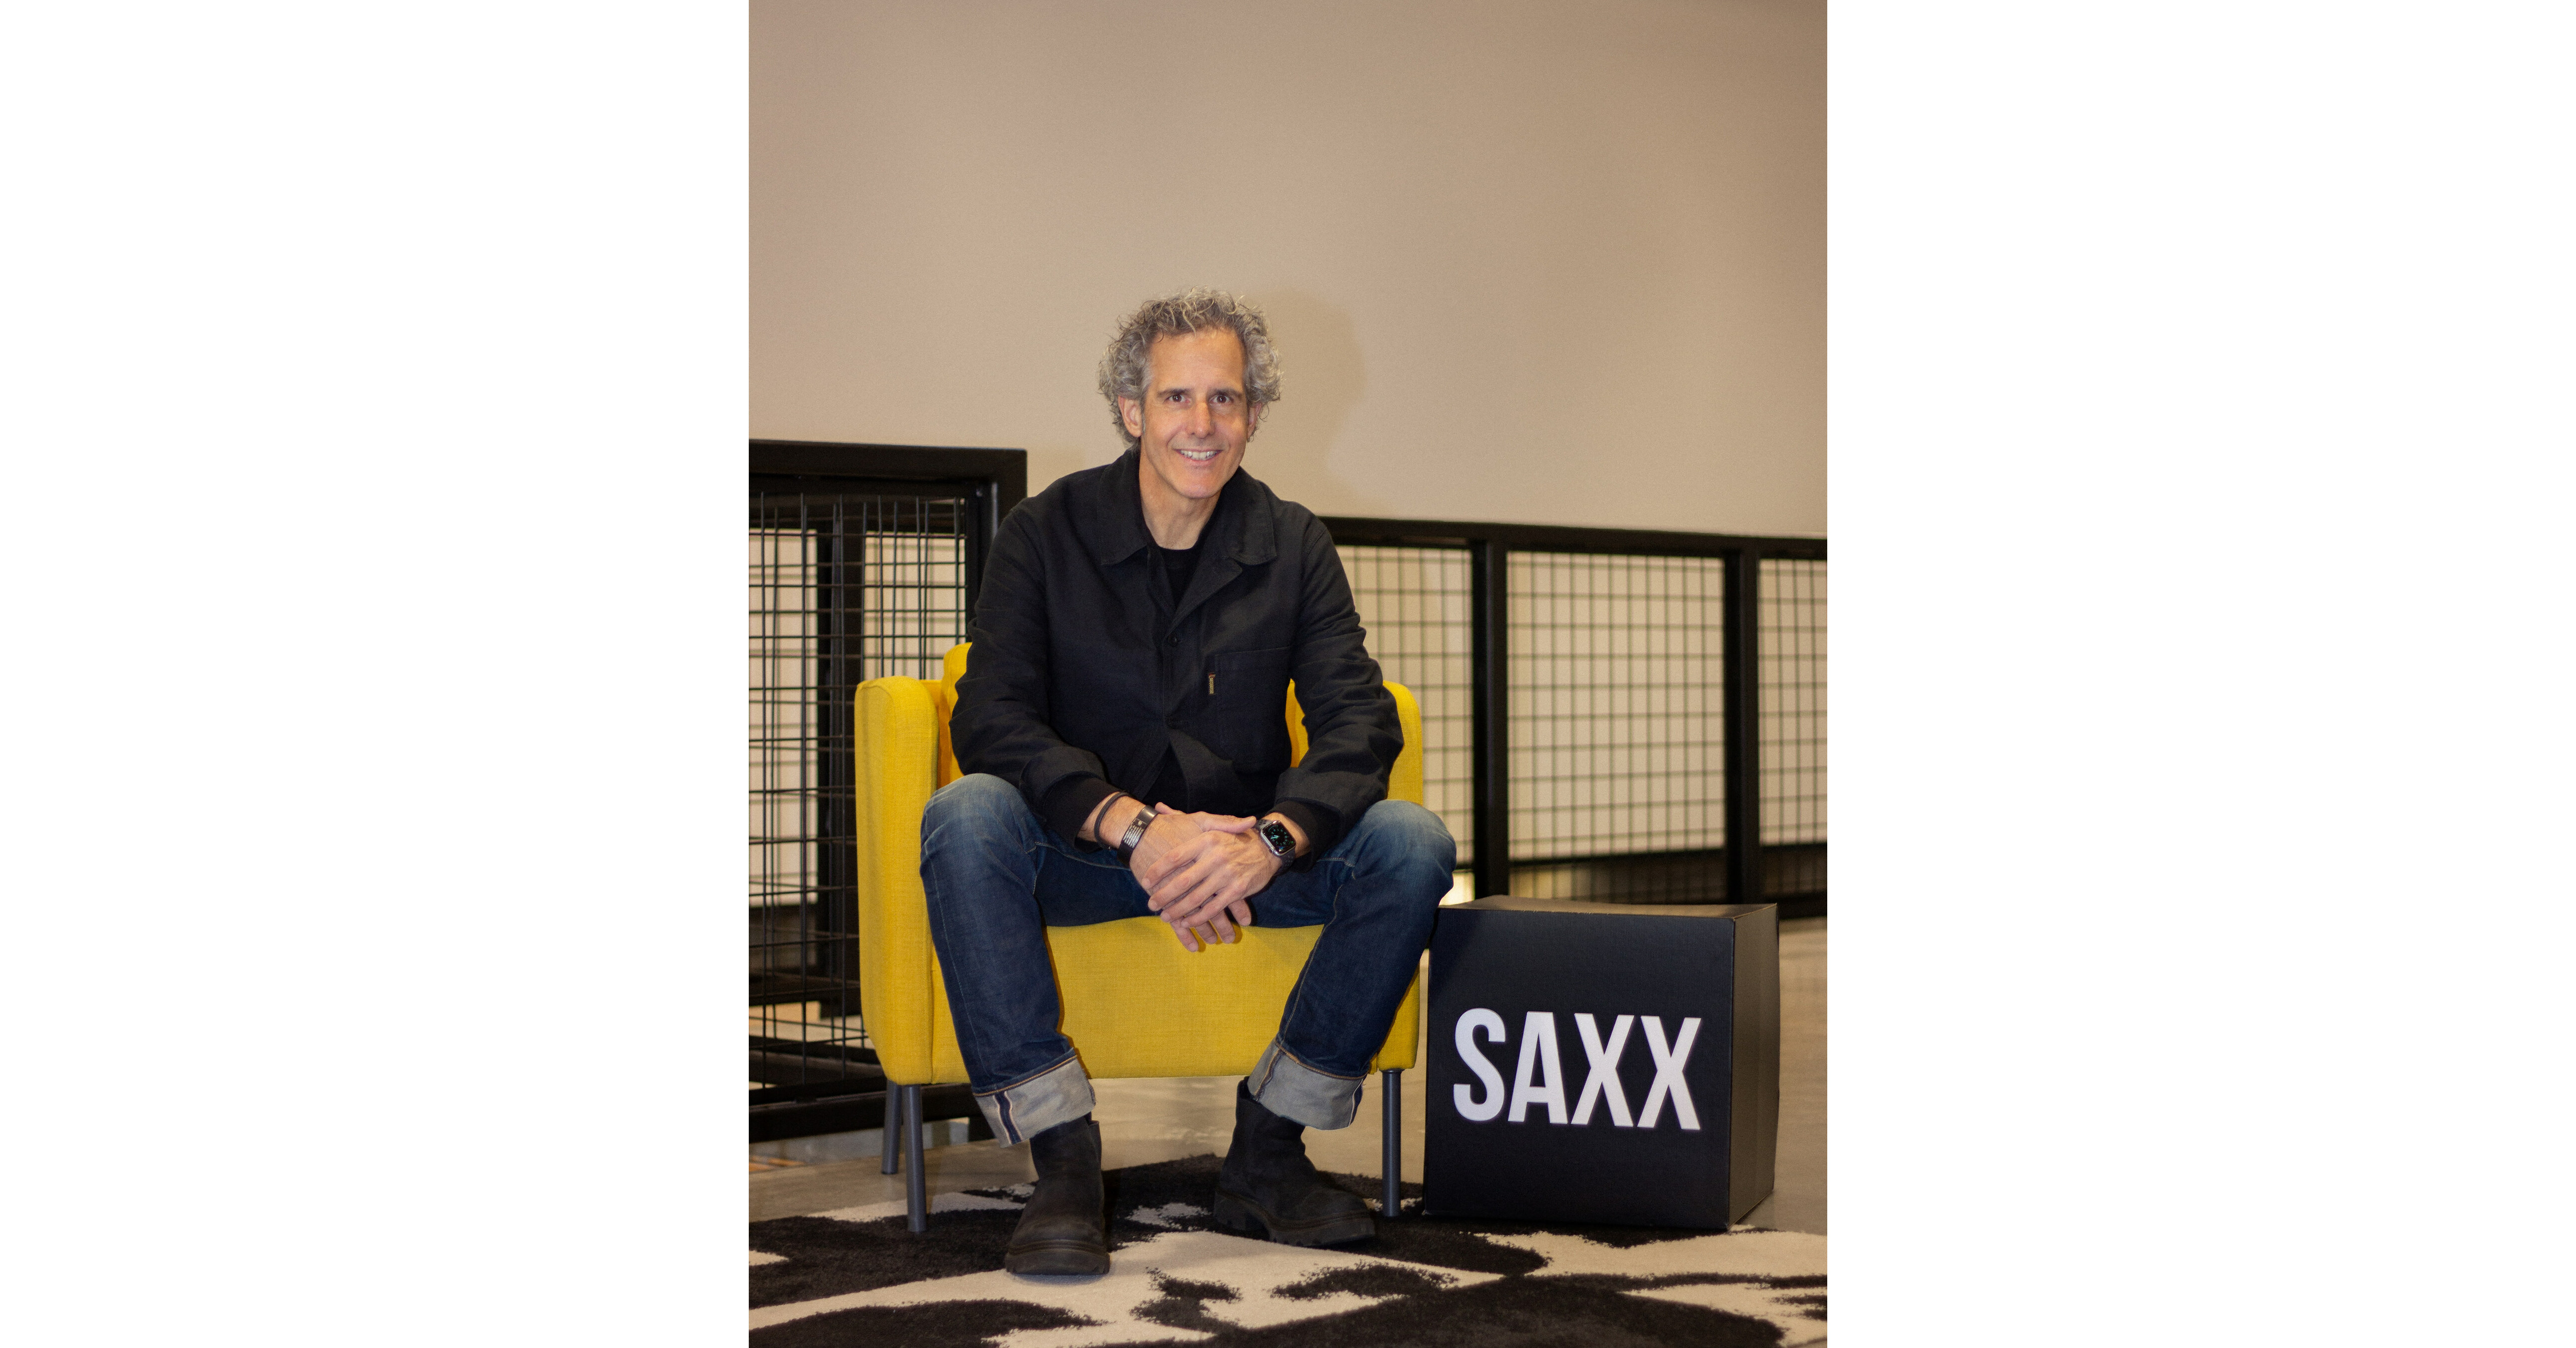 Men's Underwear Brand SAXX Signs Six-Player NIL Deal, Introduces